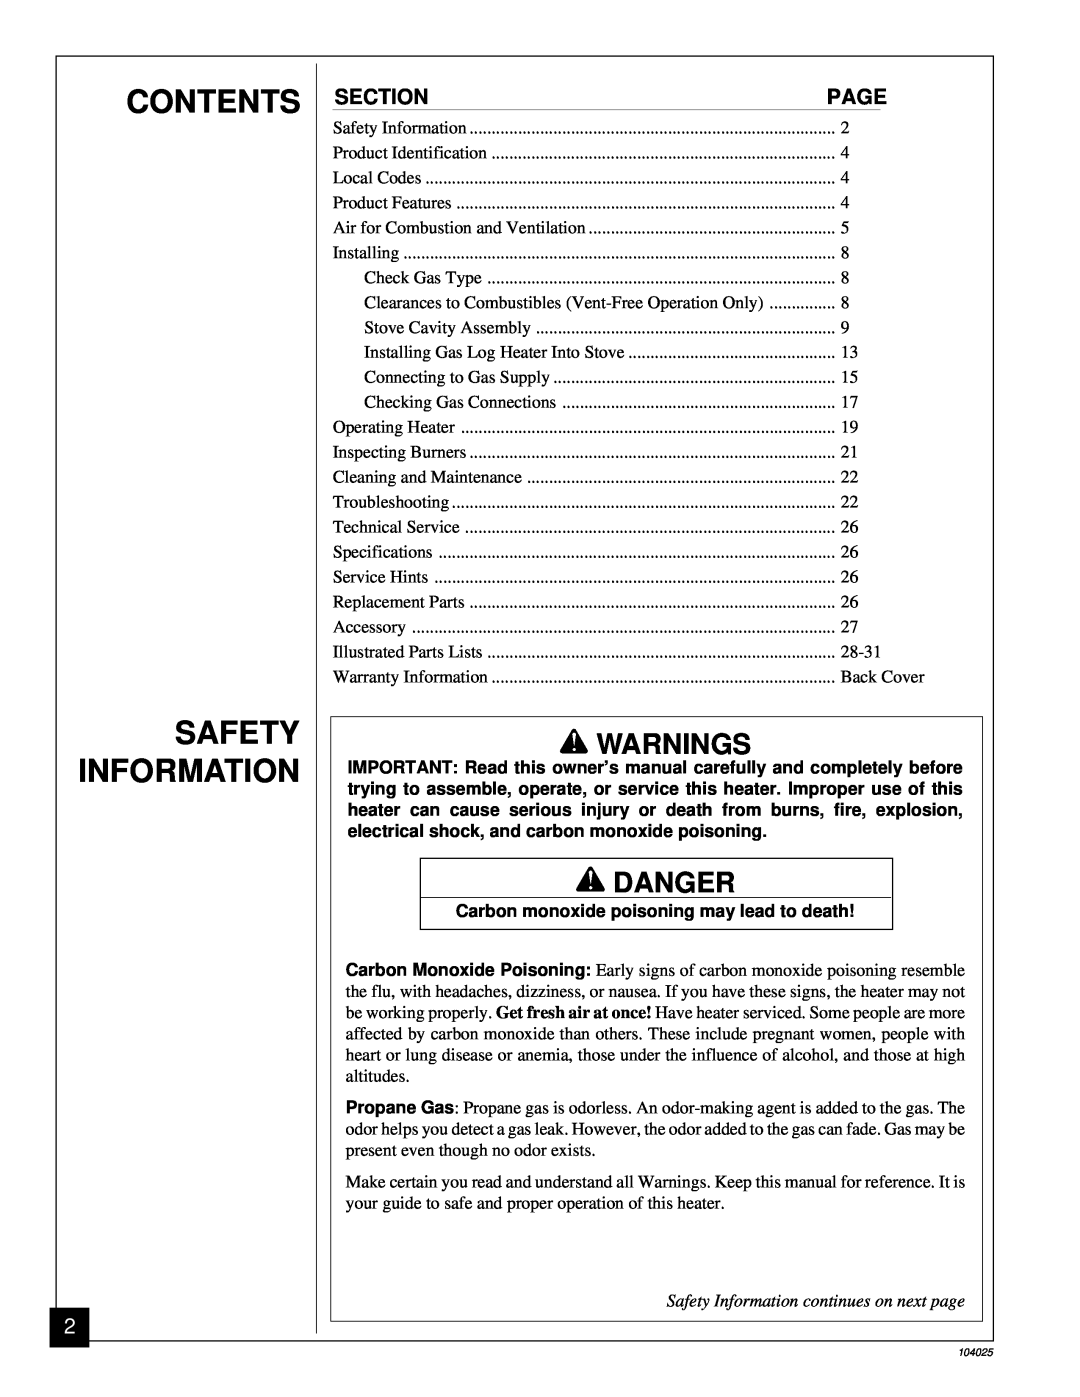 Desa SCIVFG, SCIVFB, SCIVFR, SCIVFC Contents Safety Information, Warnings, Danger, Safety Information continues on next page 